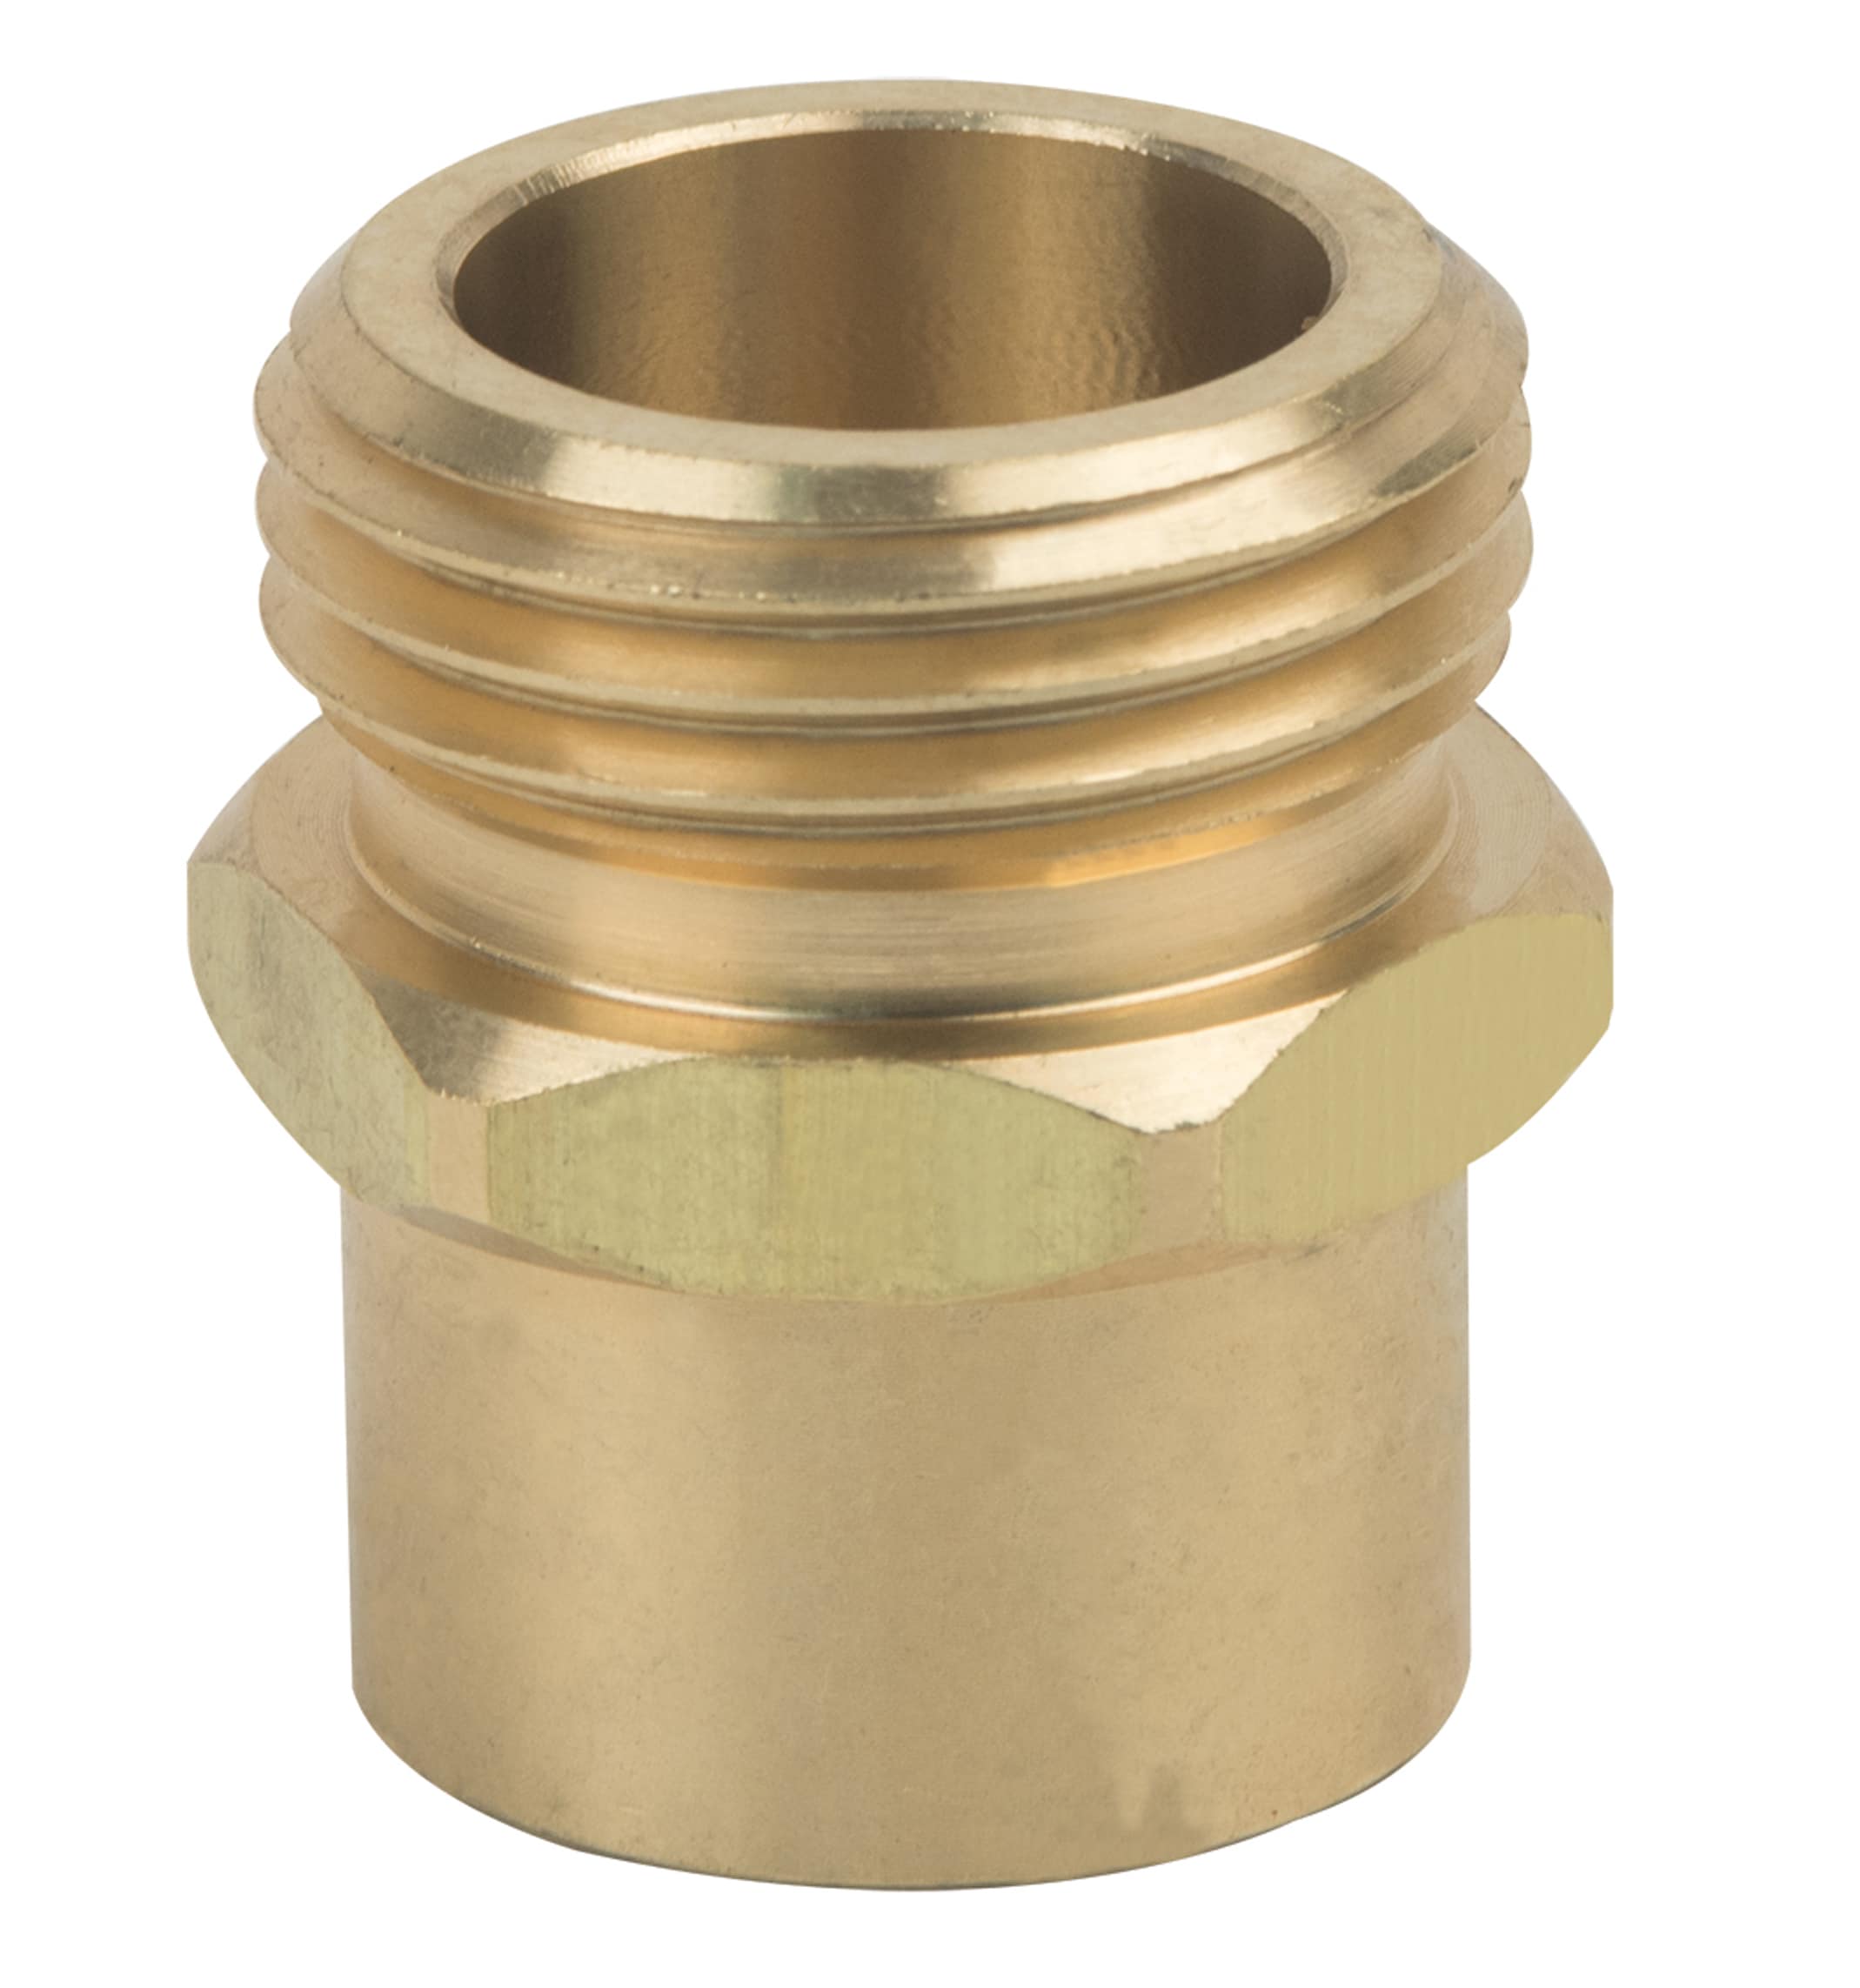 1/2" Male NPT Pipe to 3/4" Male Garden Hose End GHT Adapter with shut off valve